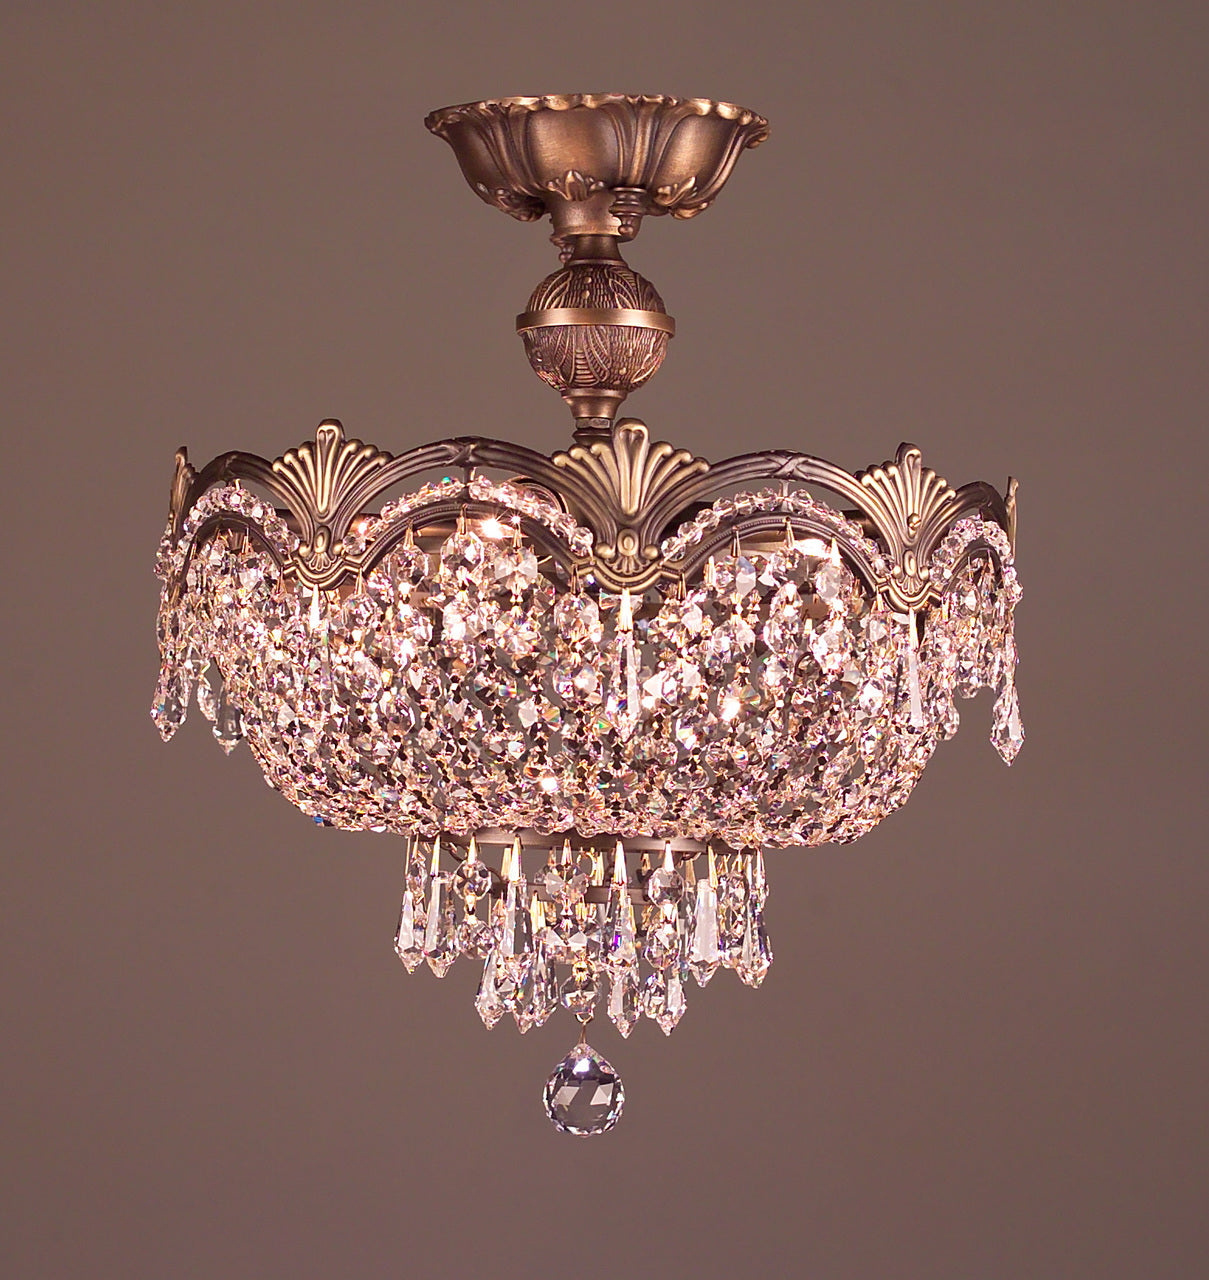 Classic Lighting 1856 RB S Regency II Crystal Flushmount in Roman Bronze (Imported from Spain)